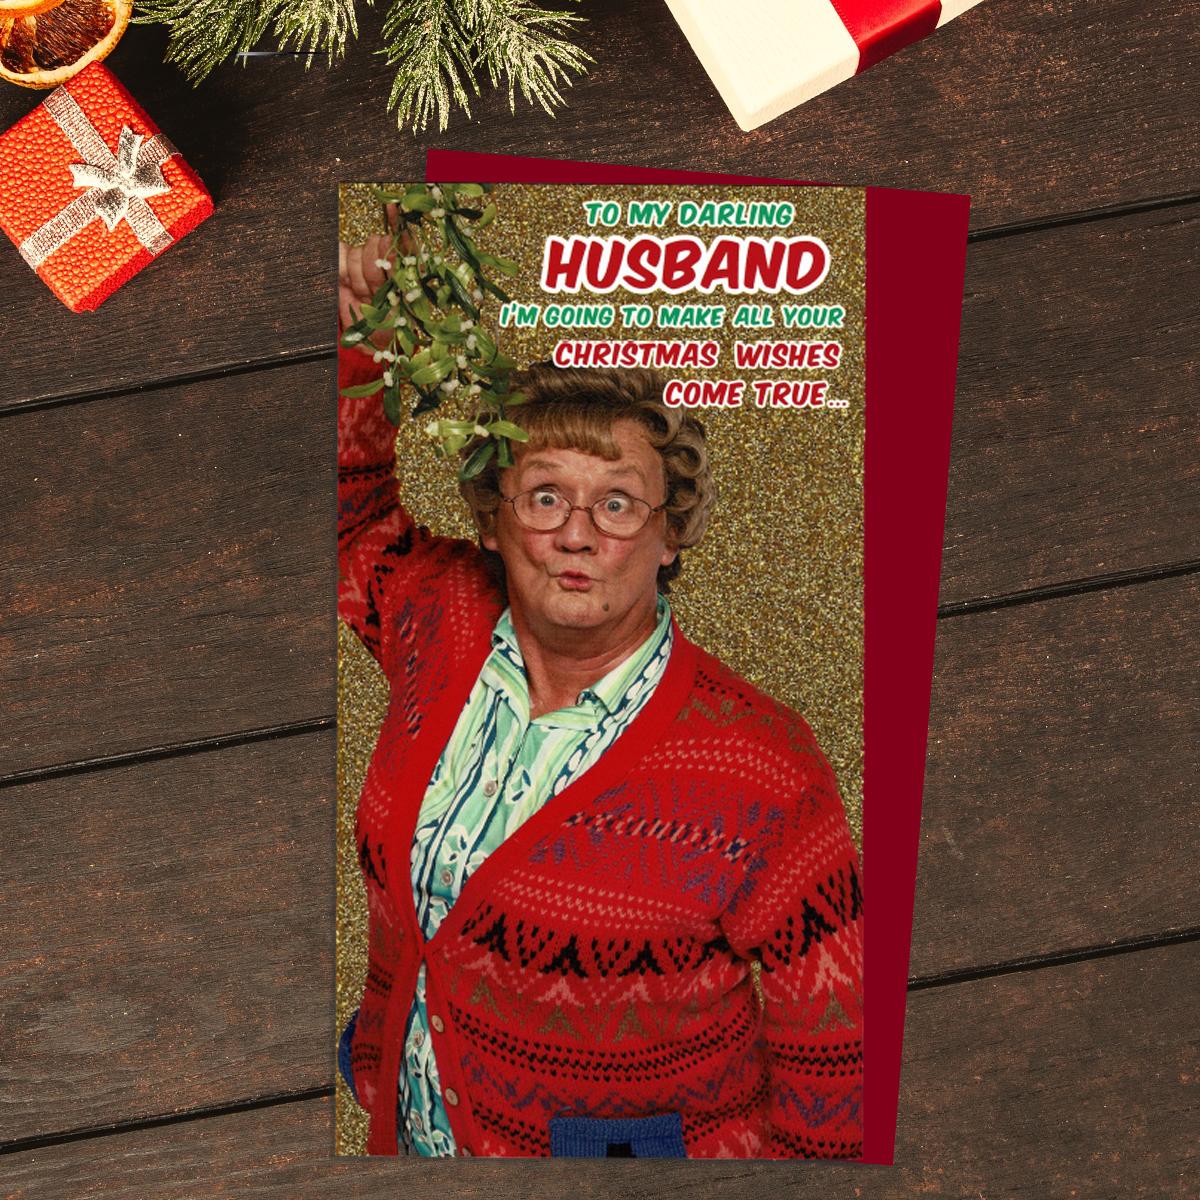 A Comical Mrs Brown's Boys Christmas Card To My Darling Husband -I'm Going To Make All Your Christmas Wishes Come True... (Mrs Brown holding a bunch of mistletoe)